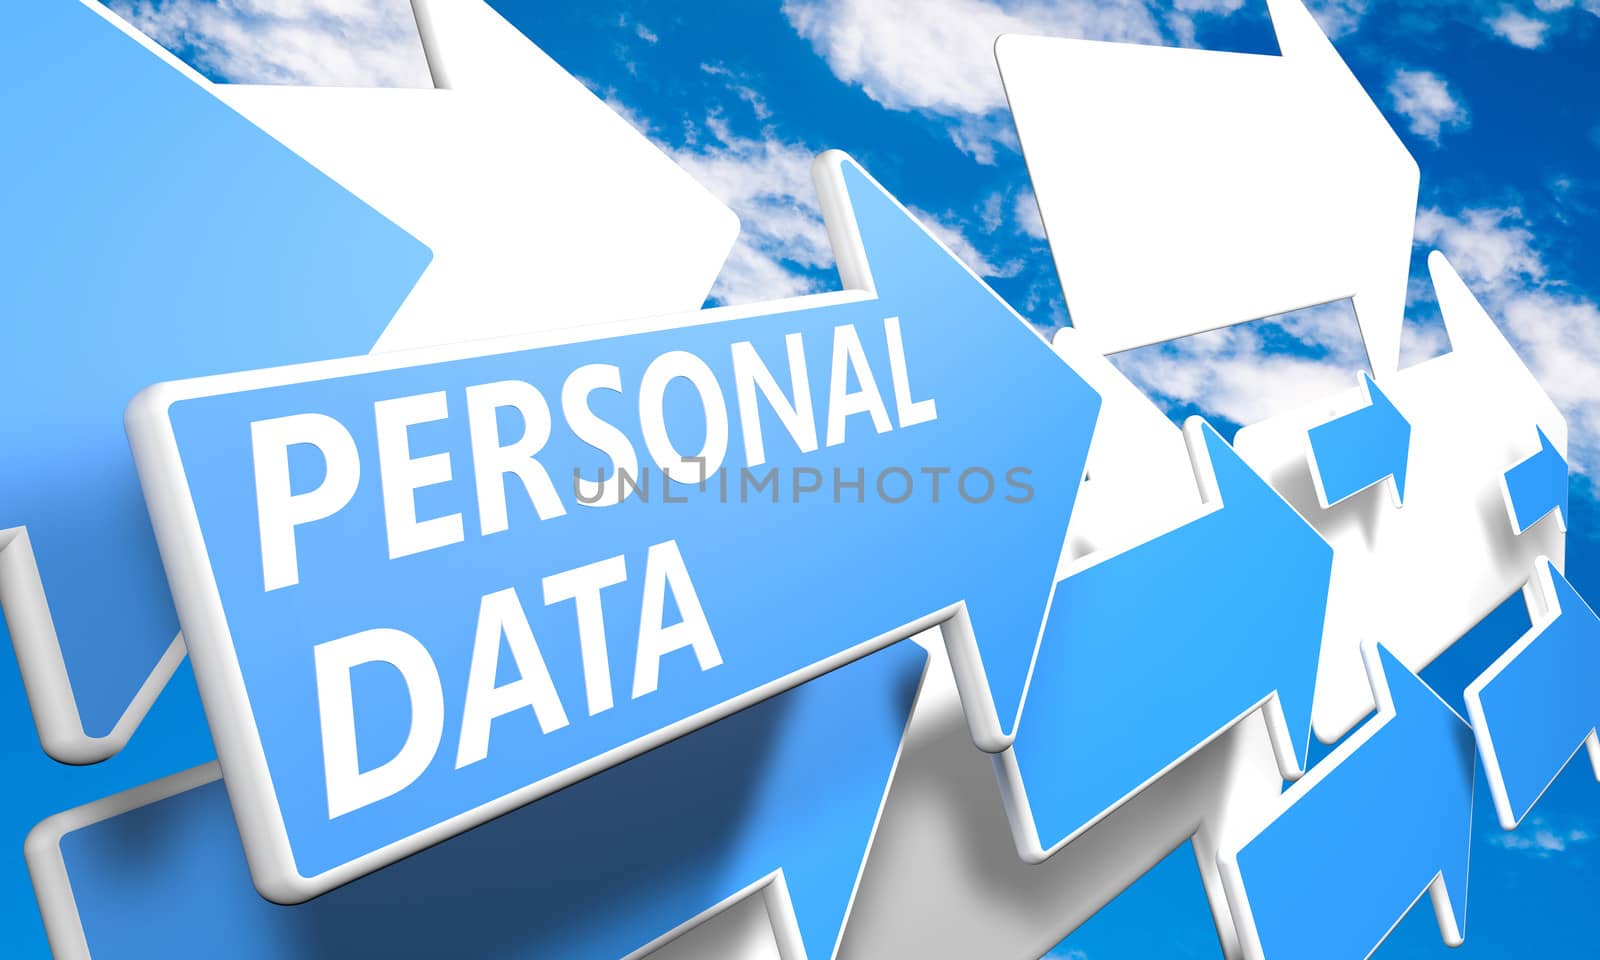 Personal Data 3d render concept with blue and white arrows flying upwards in a blue sky with clouds